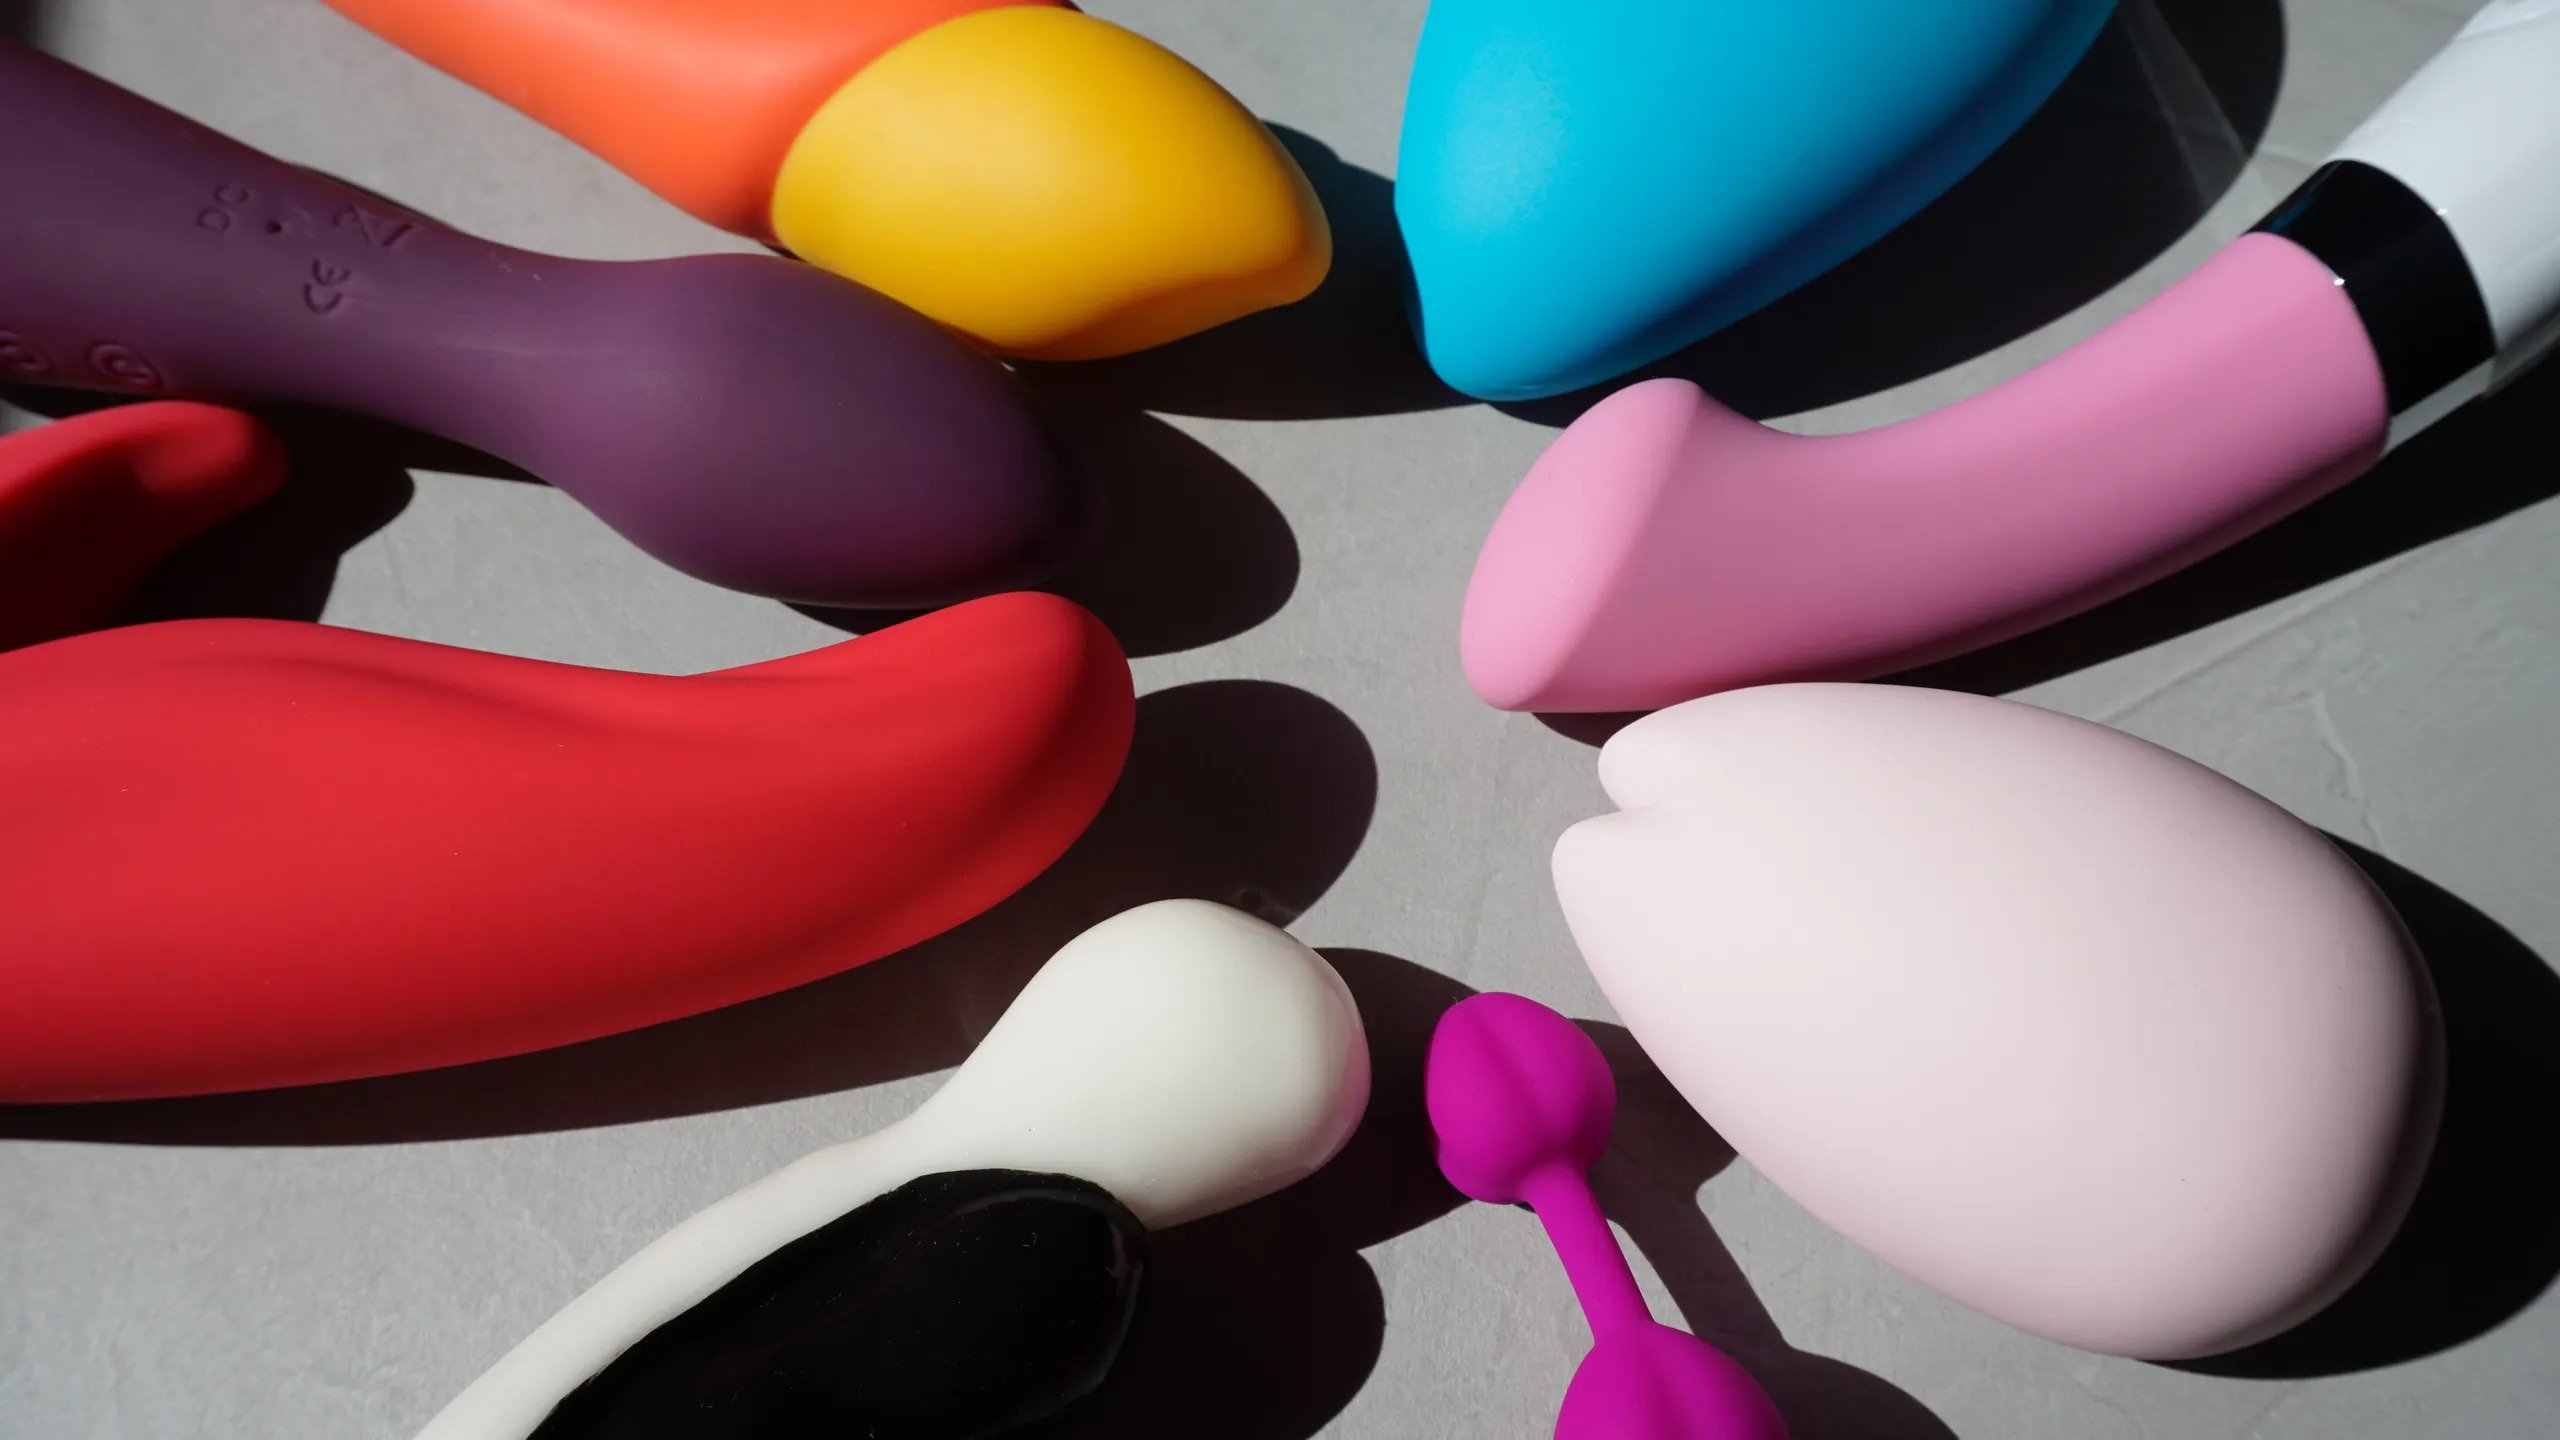 Pleasure toys for women in the gay culture